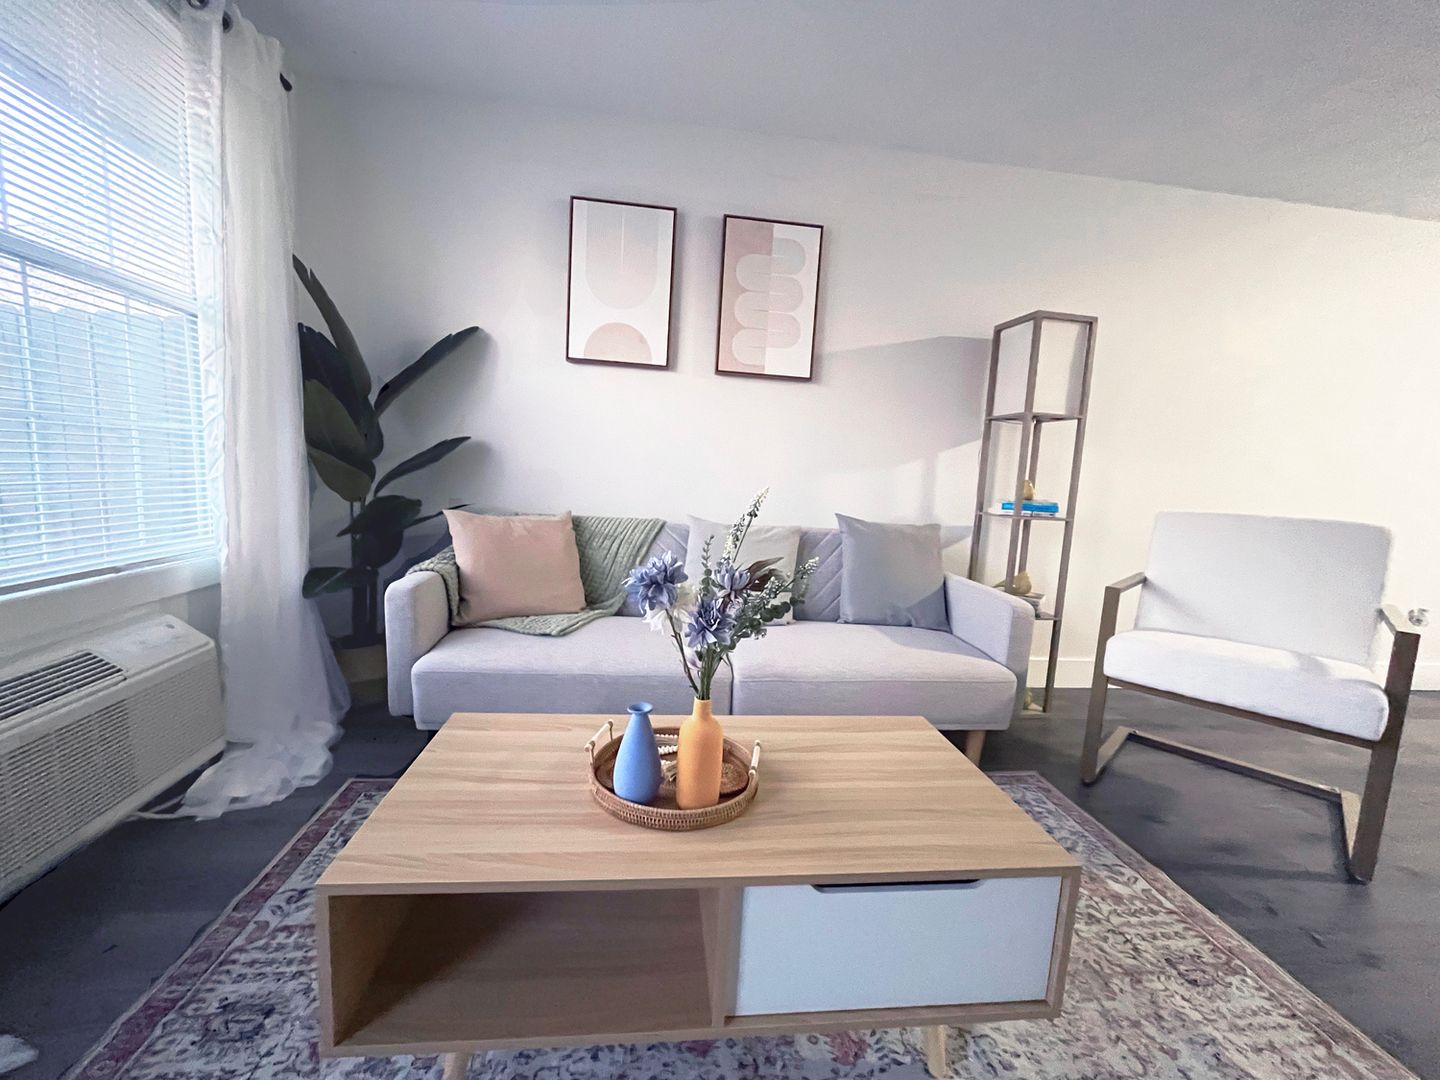 1 Bed and 1 Bath Apartments with In-Unit Laundry for Rent | Entirely Renovated Thumbnail